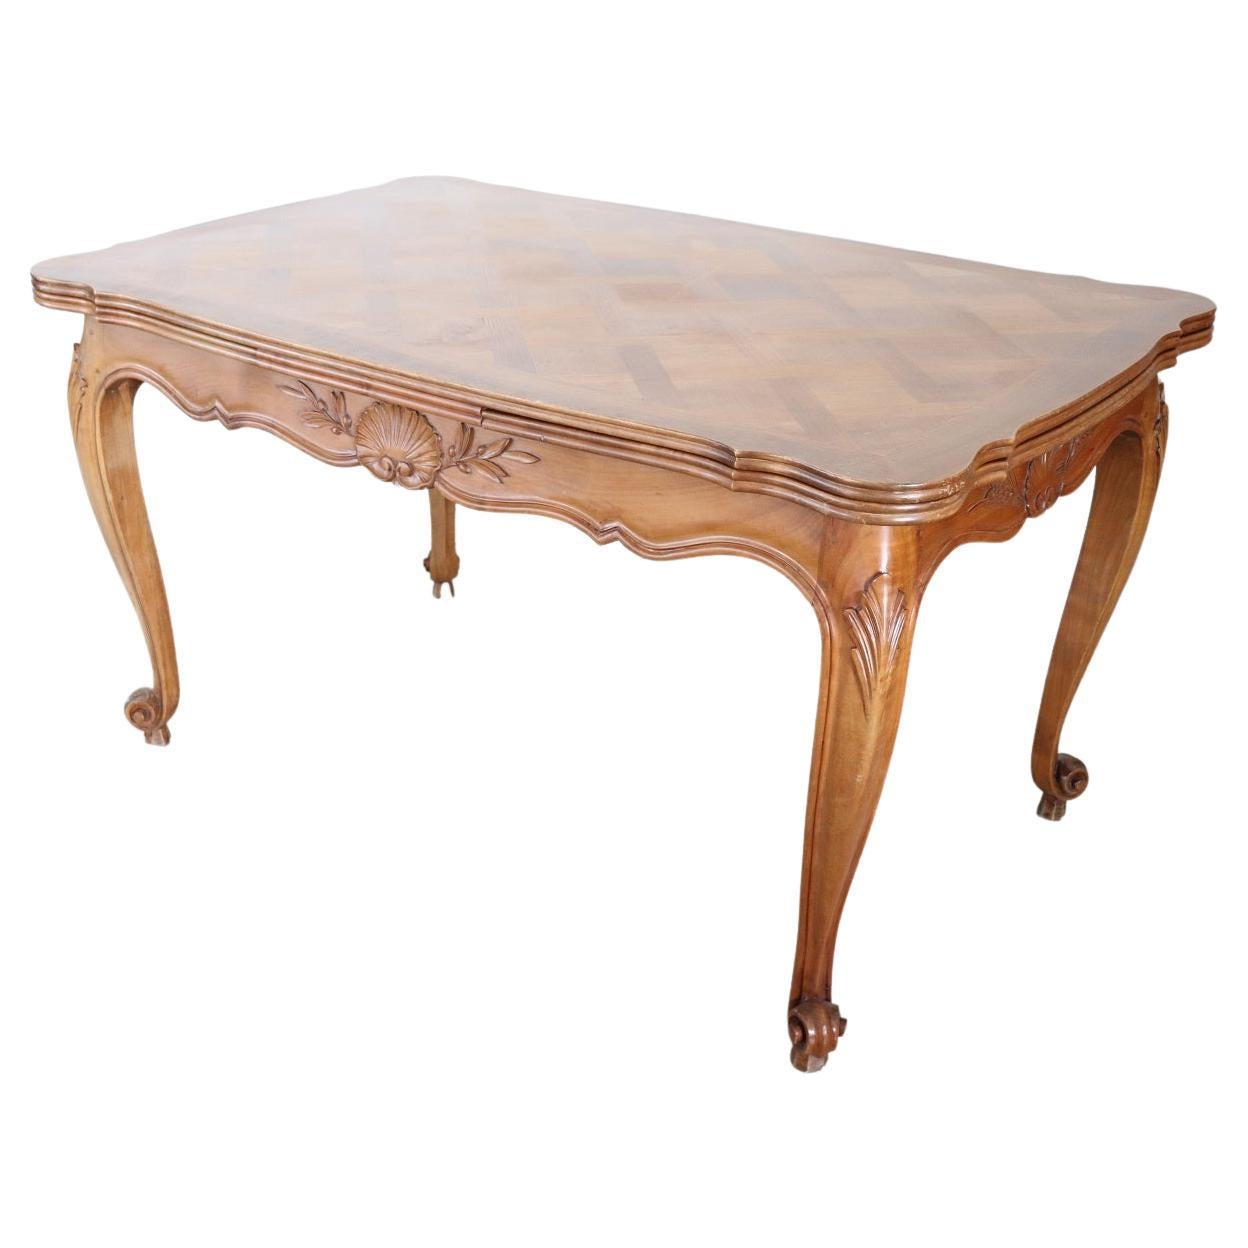 Early 20th Century Provencal Carved Cherry Wood Extendable Dining Table